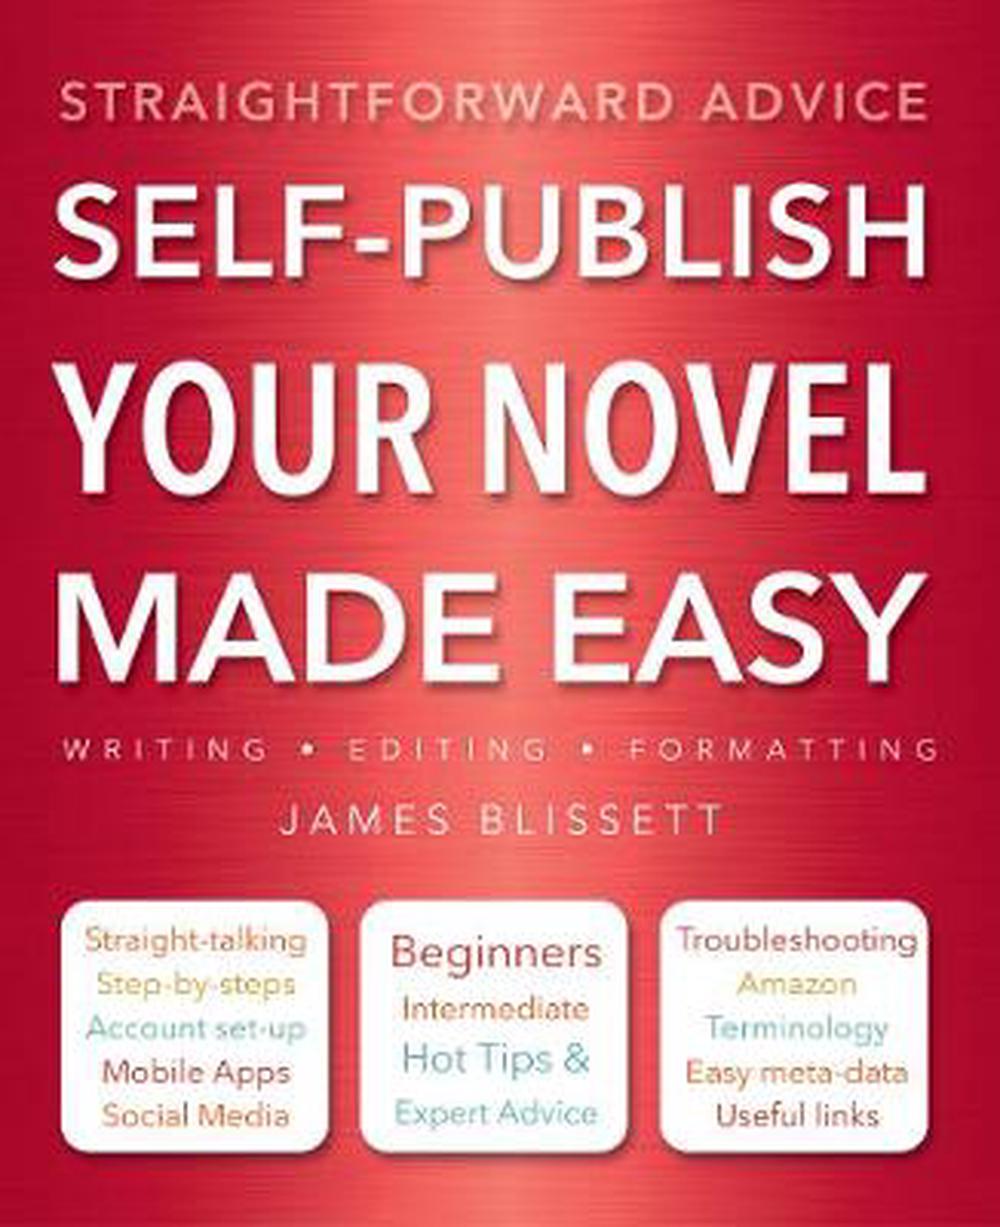 How to Publish Your Novel by Kenneth Atchity